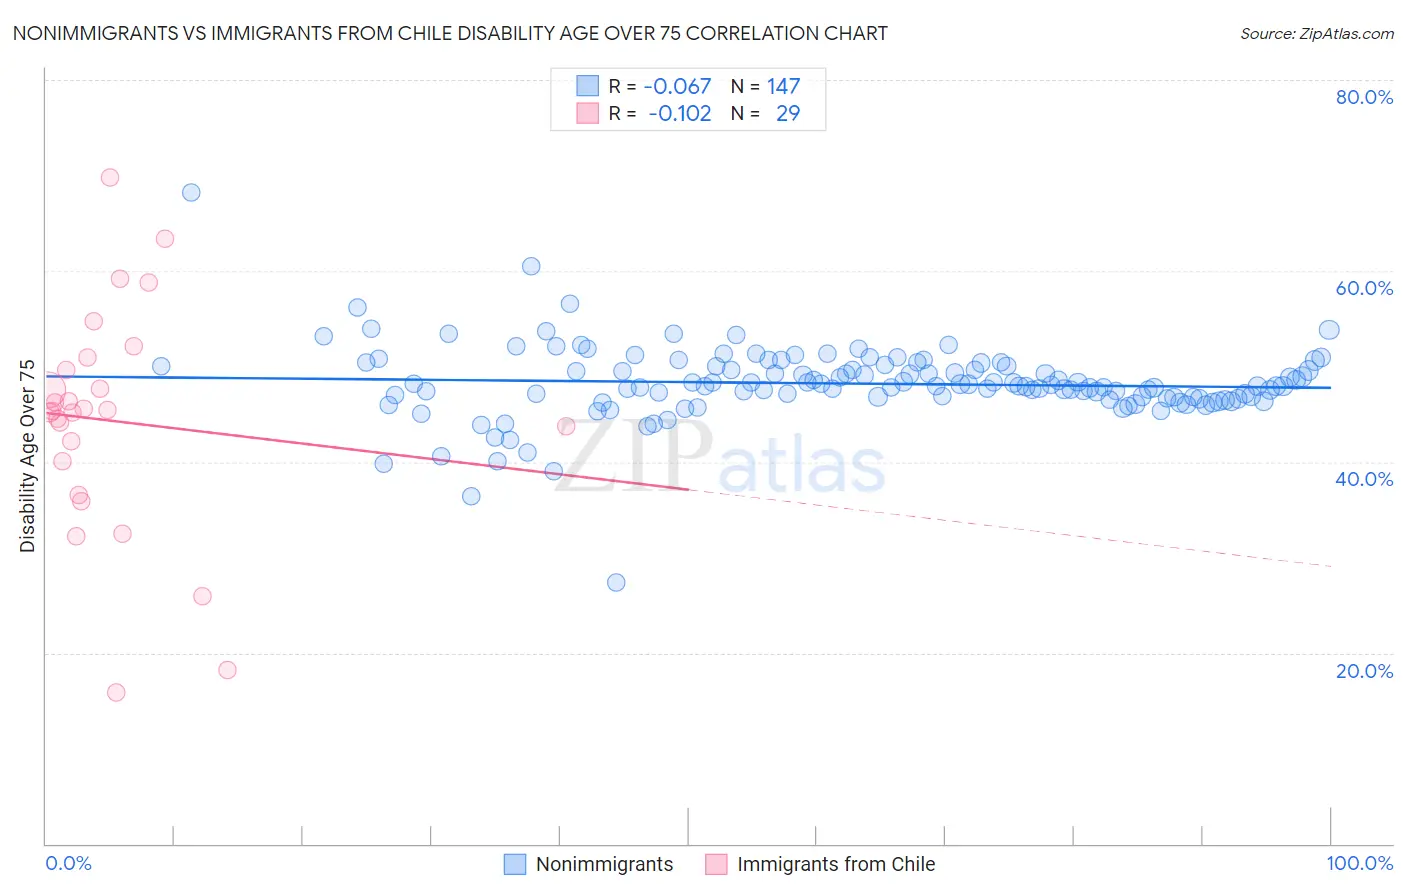 Nonimmigrants vs Immigrants from Chile Disability Age Over 75